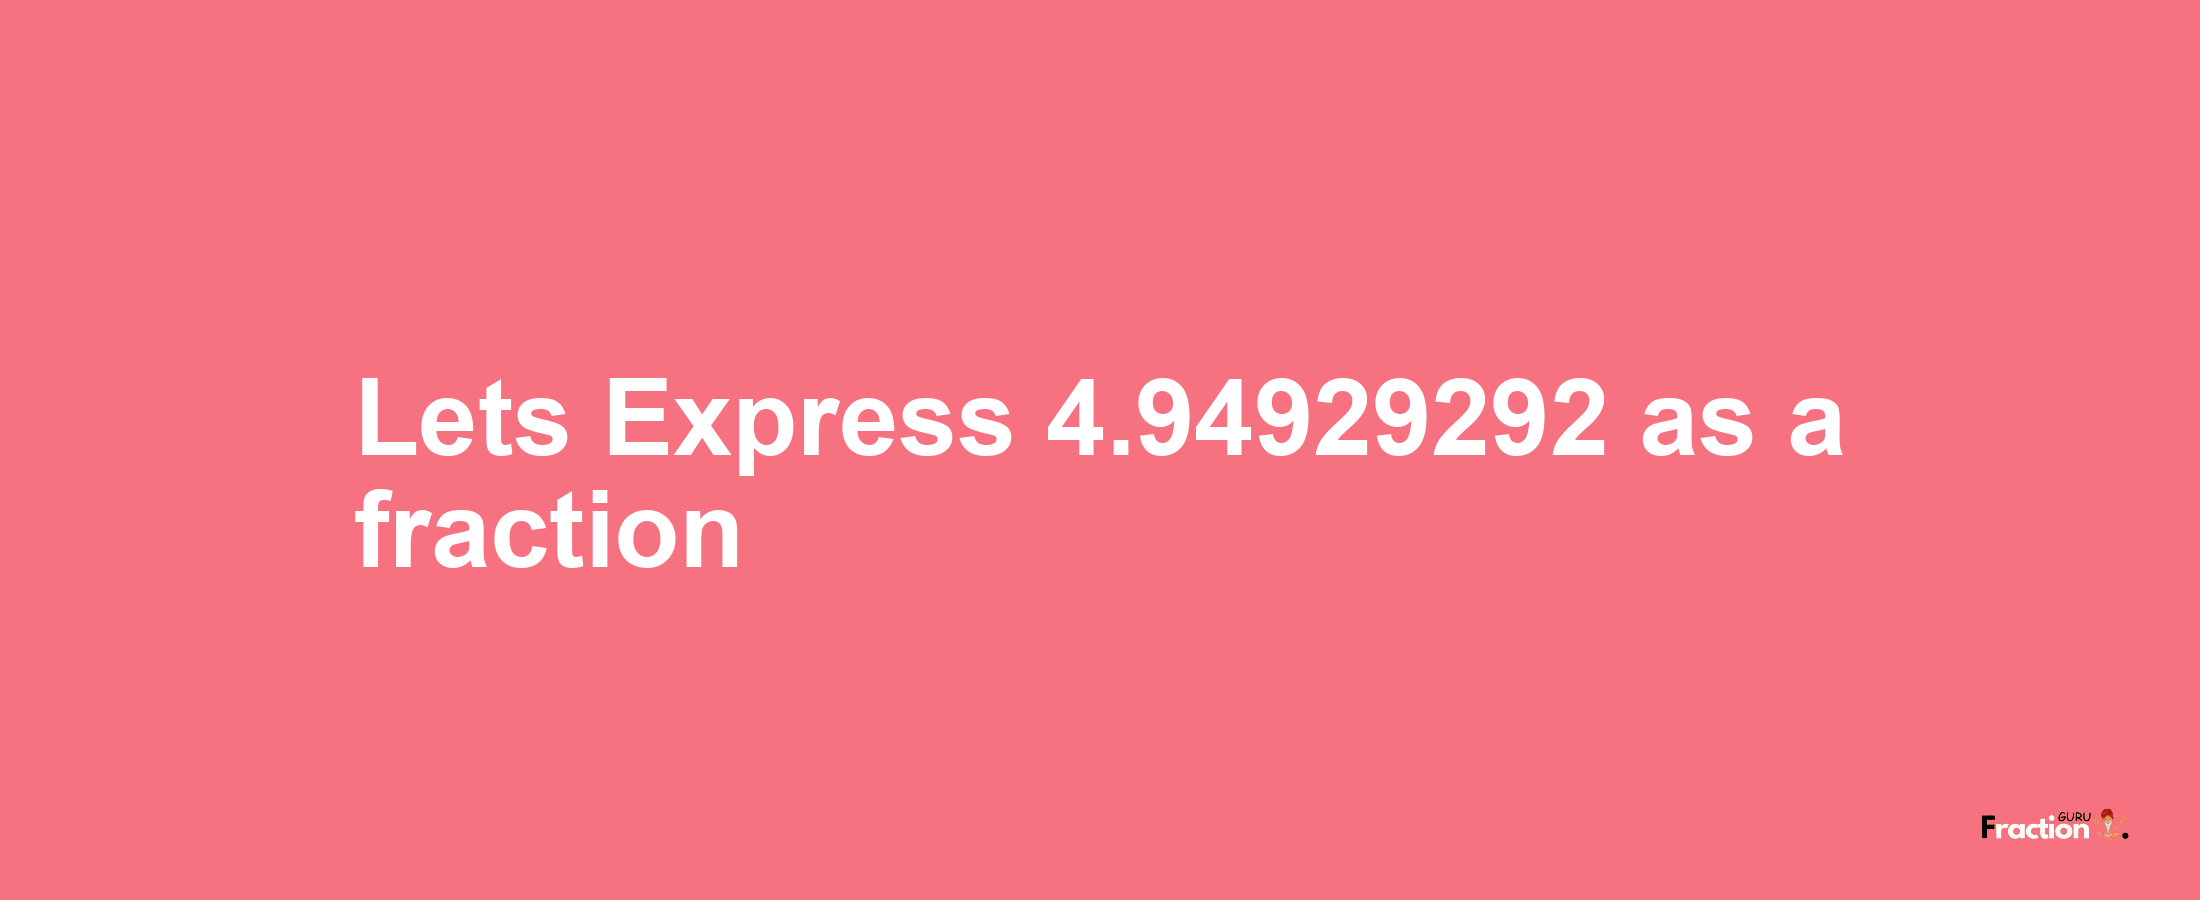 Lets Express 4.94929292 as afraction